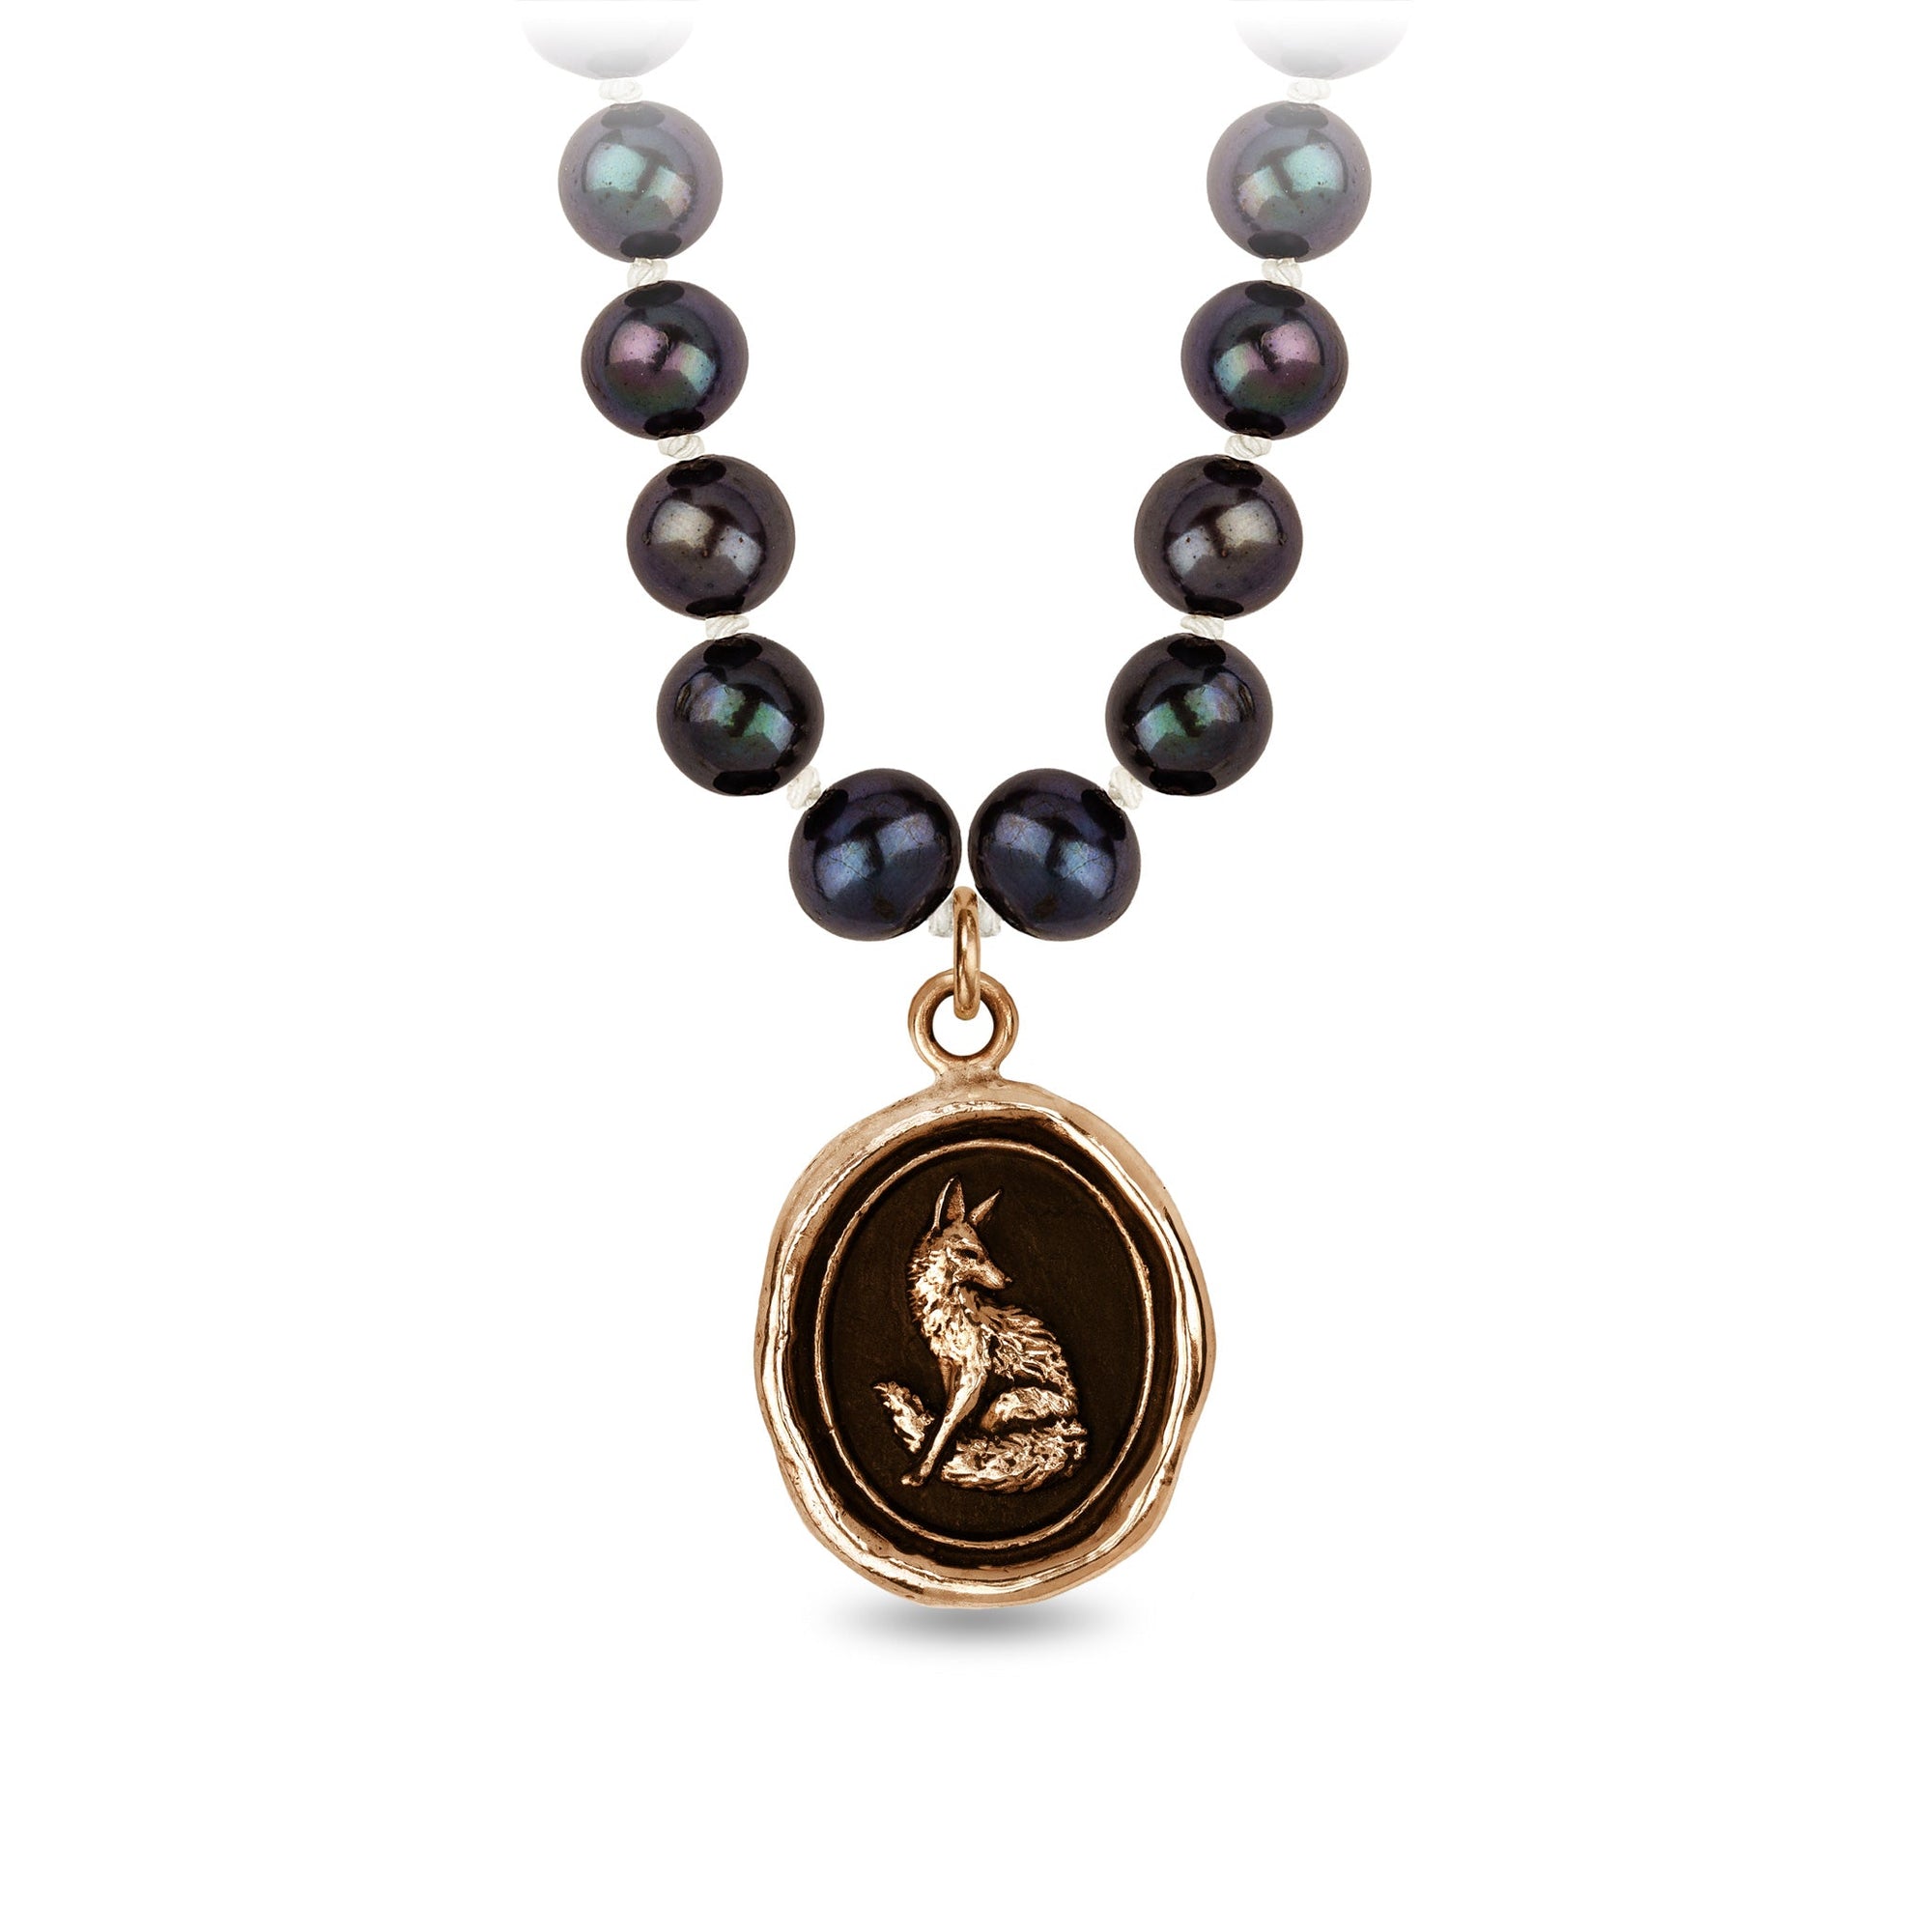 Trust in Yourself Freshwater Pearl Necklace - Peacock Black